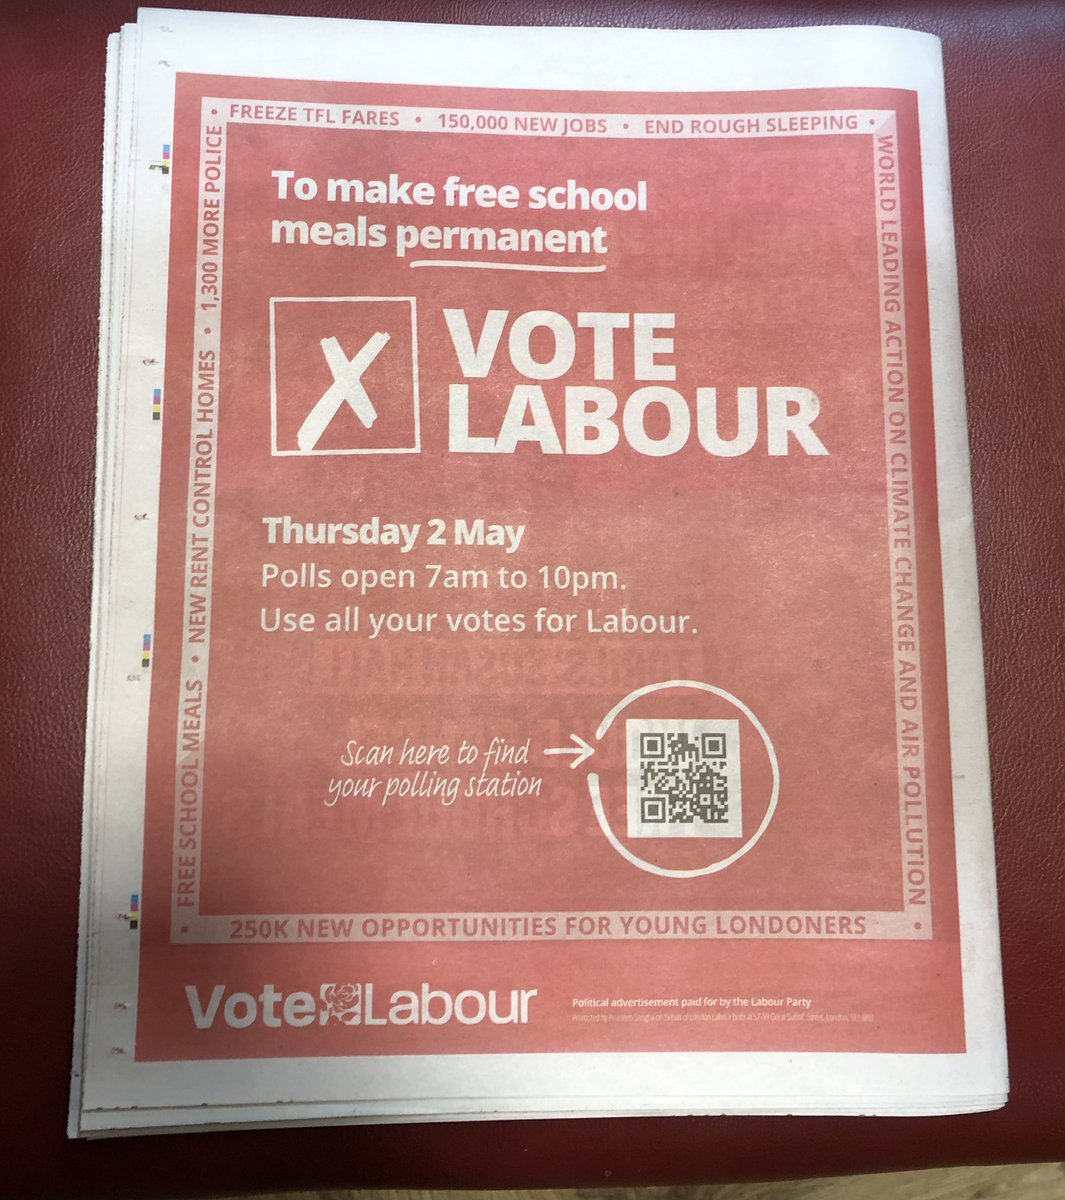 Front & back cover of The Richmond & Twickenham Times in Tesco this morning dated 2nd May Bit late as polls closed yesterday ! Wonder how much these adverts costs ? Interestingly enough it’s not very clear it’s for the mayoral election